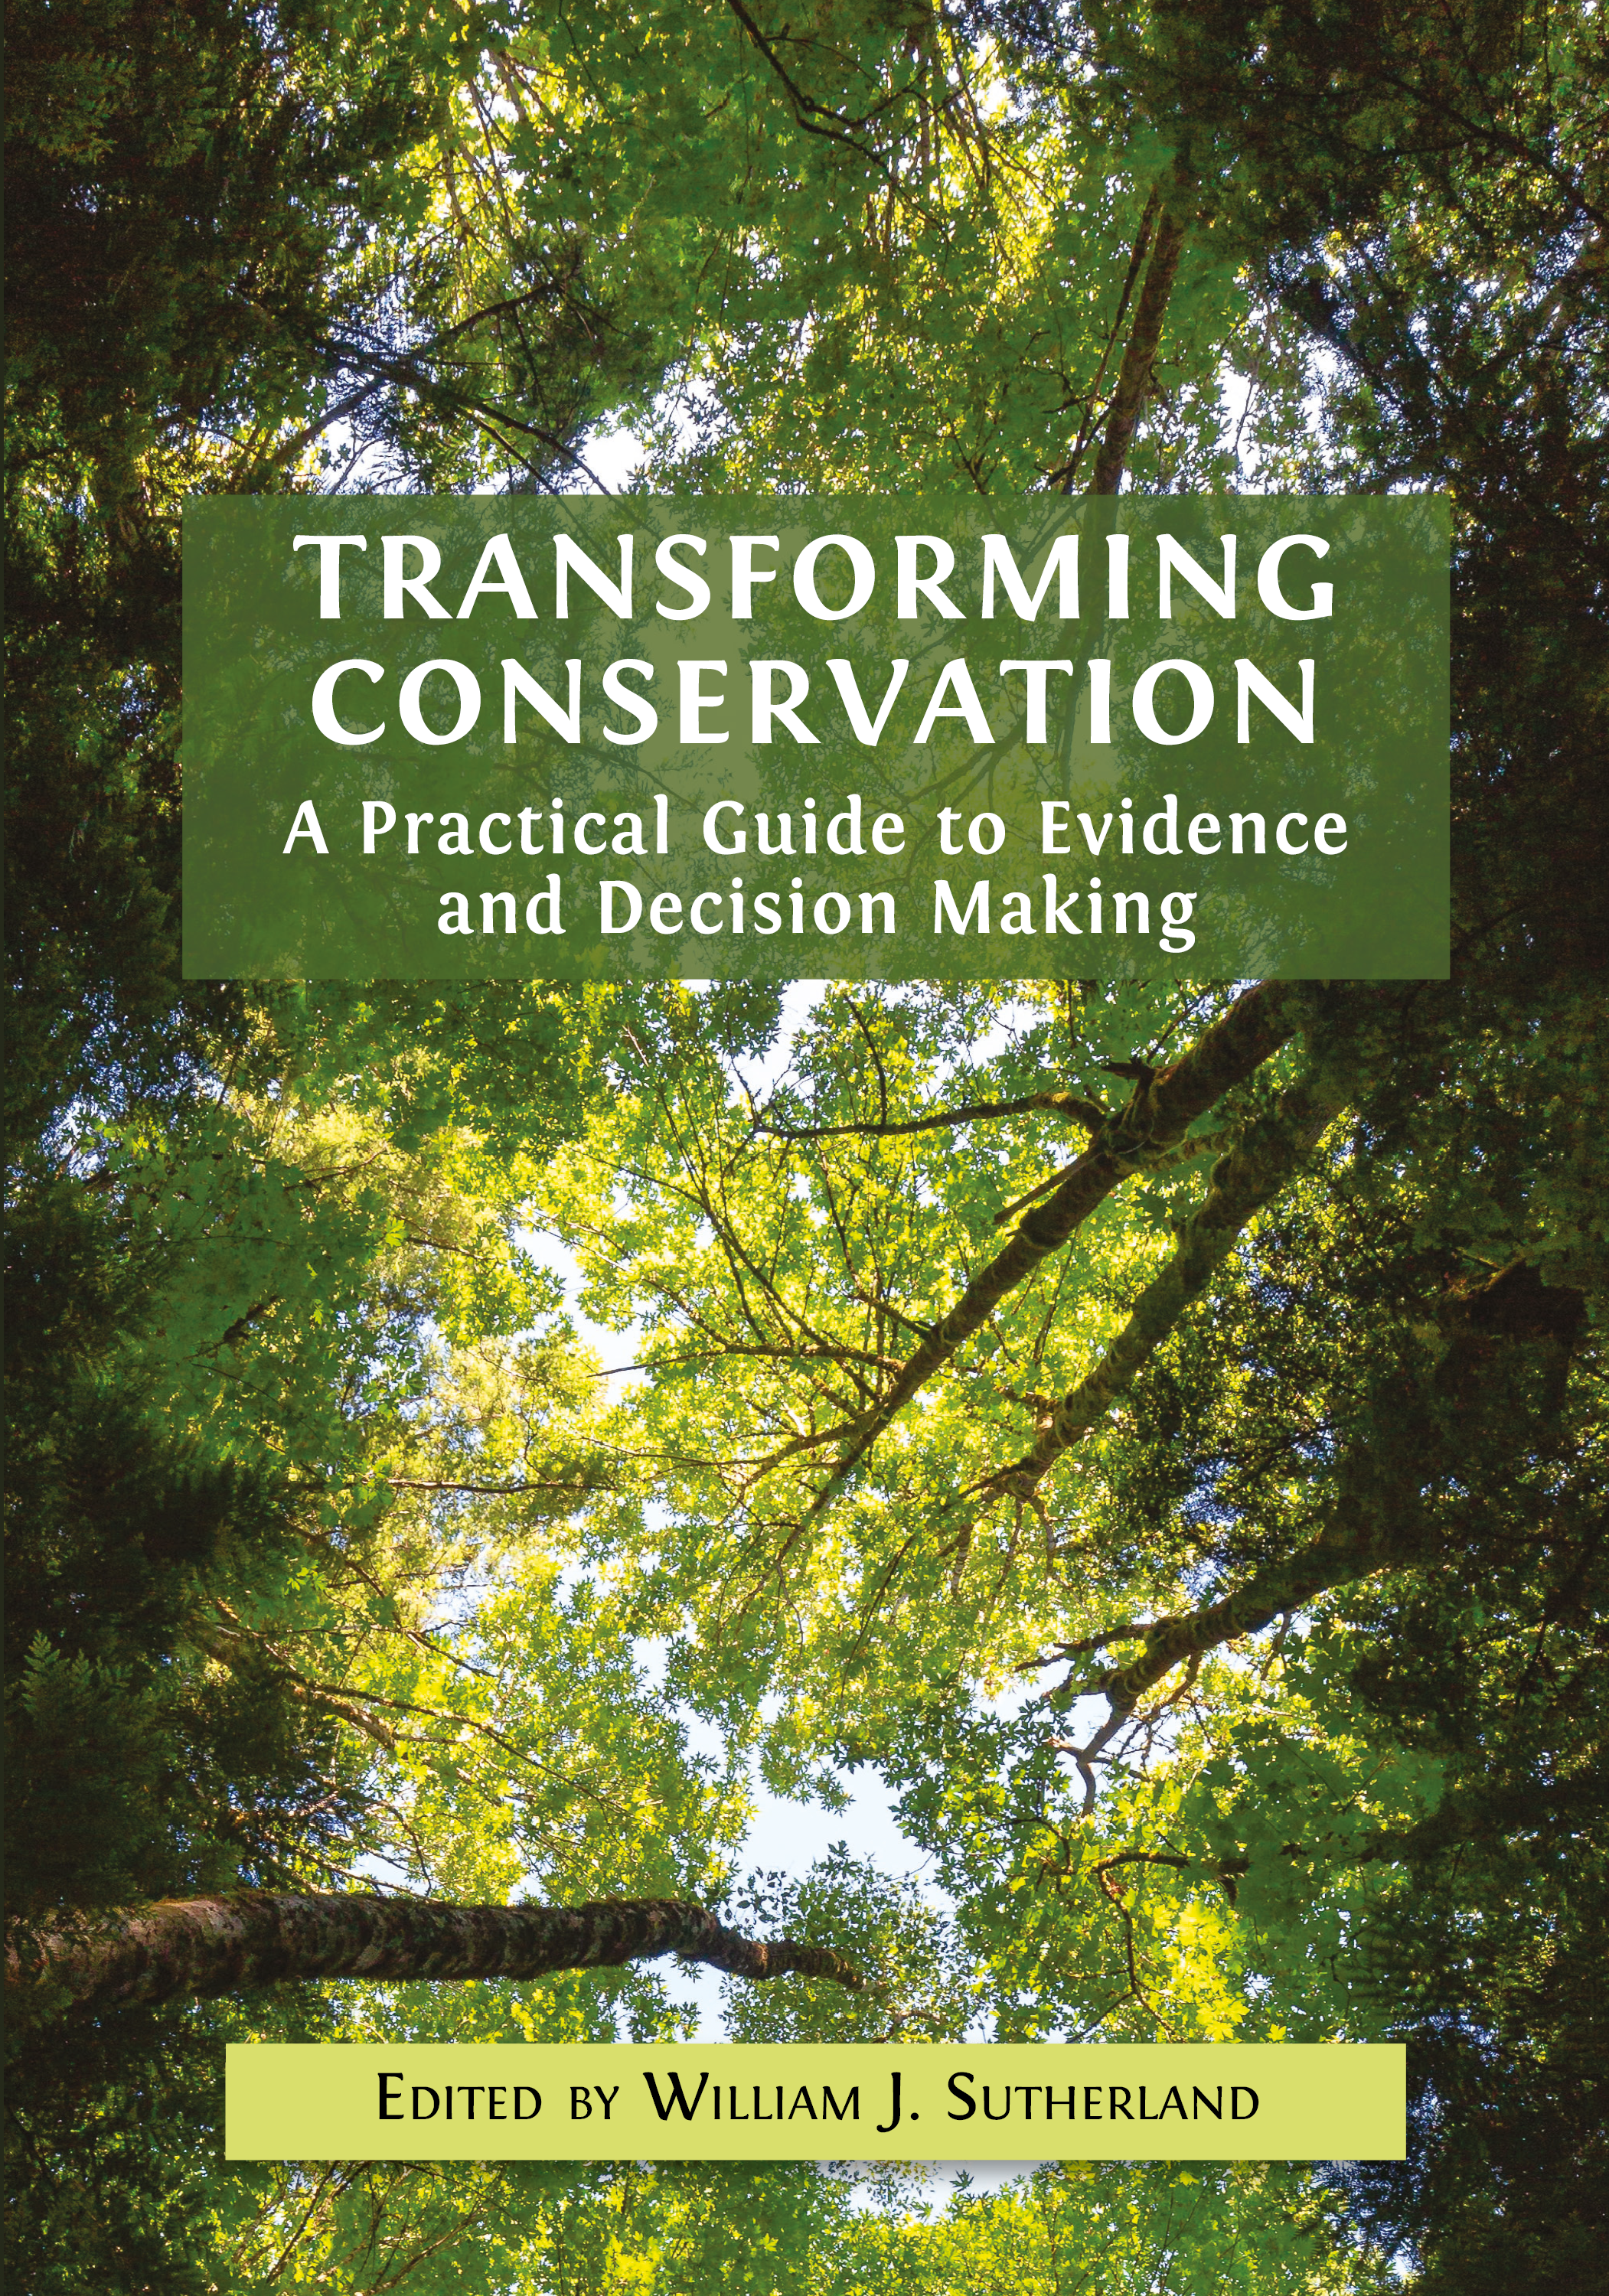 Transforming Conservation book cover image